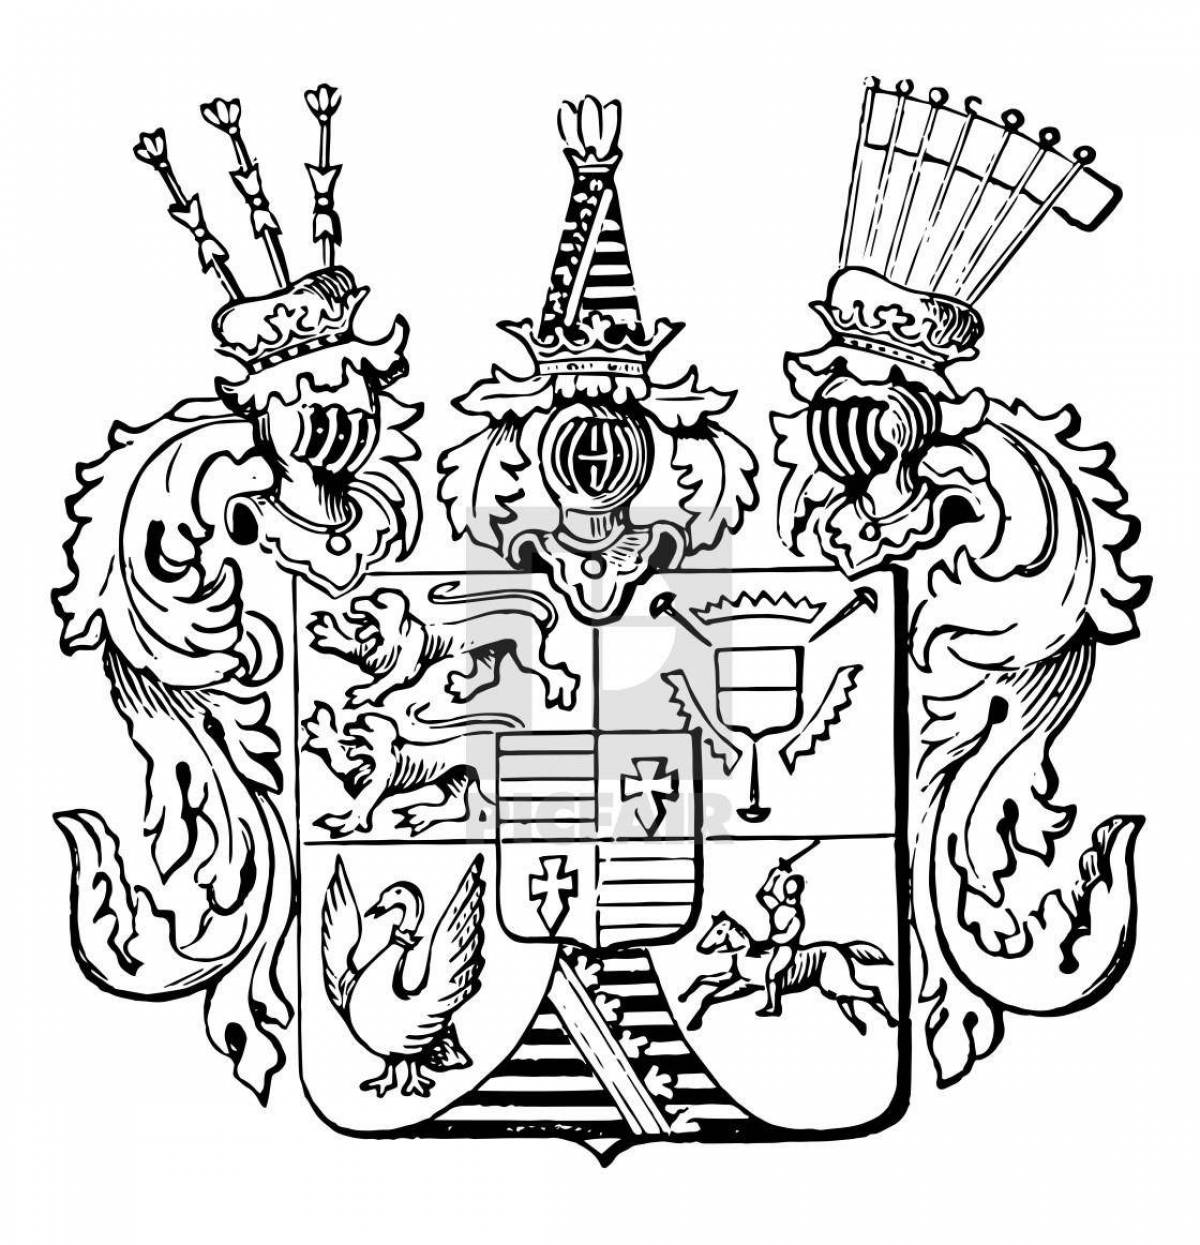 Colourful coat of arms of germany coloring page